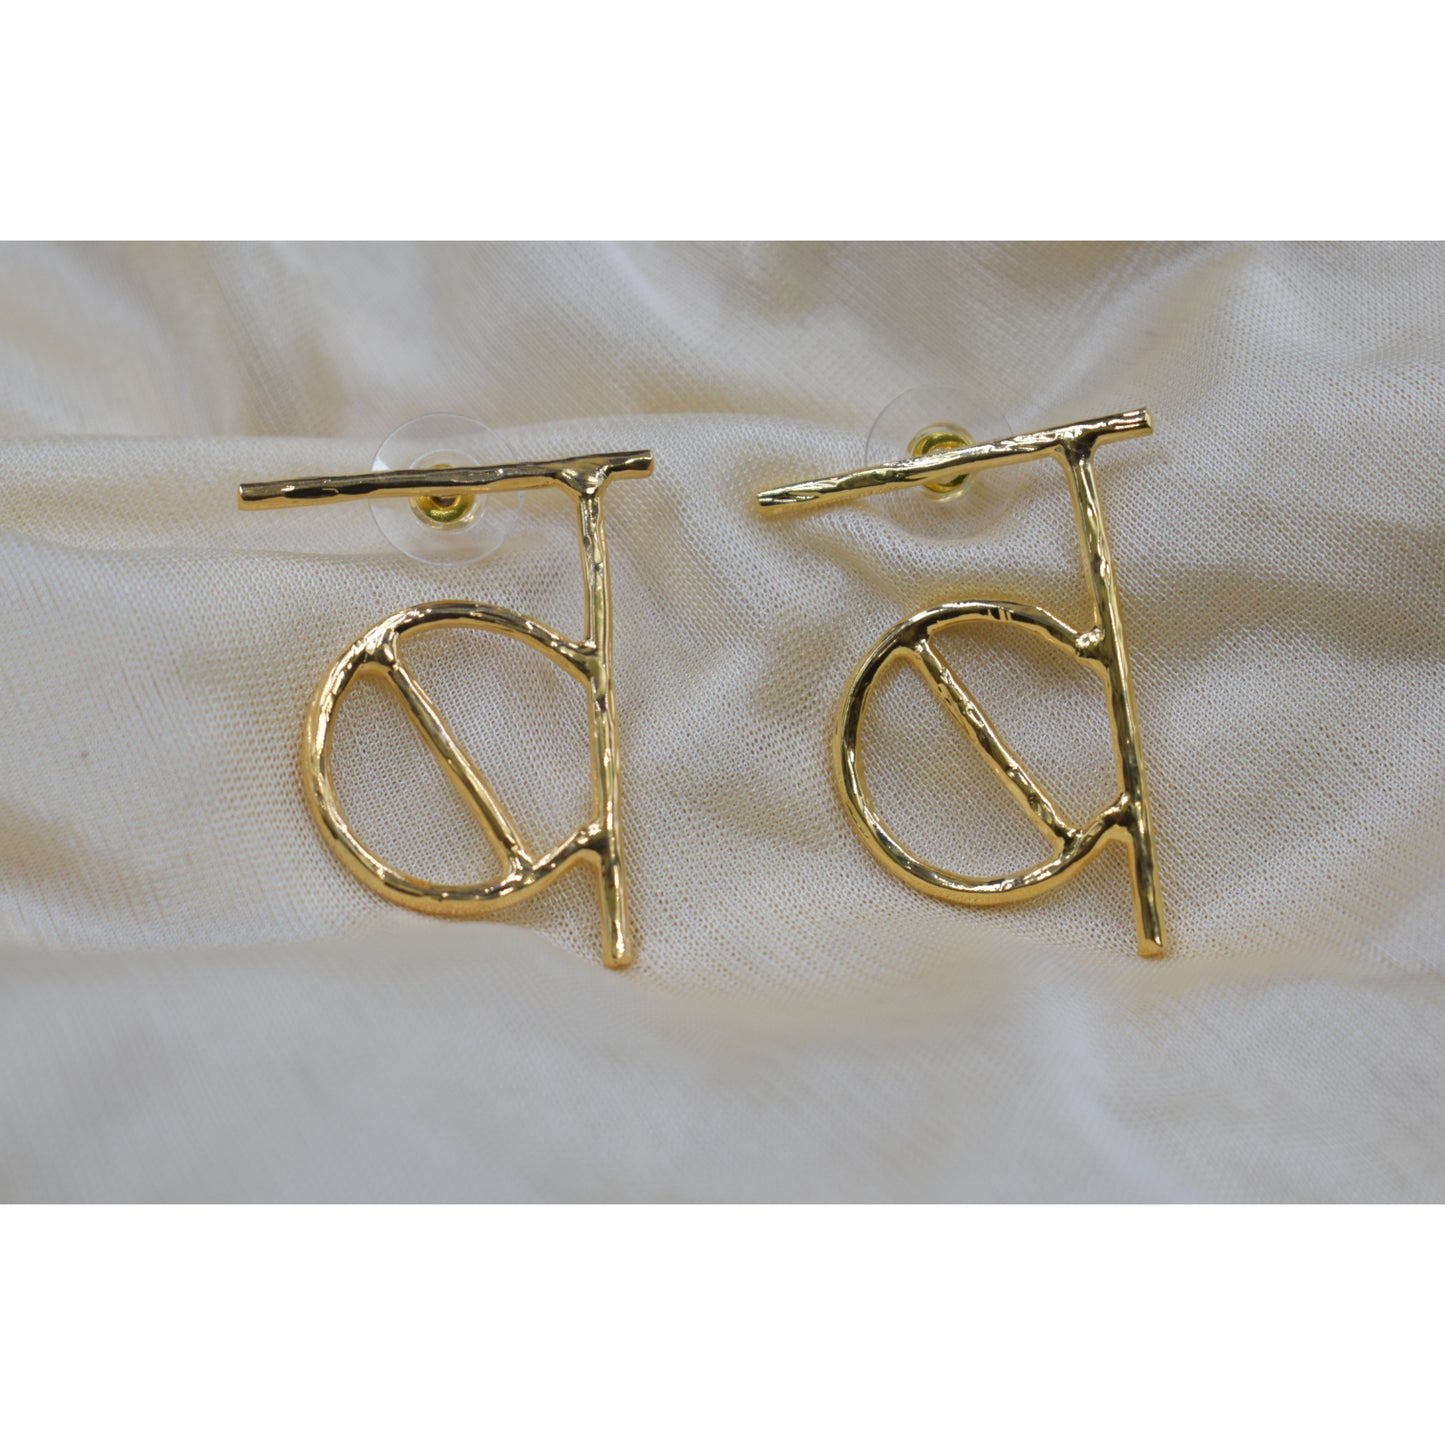 A pair of premium quality plating word earing